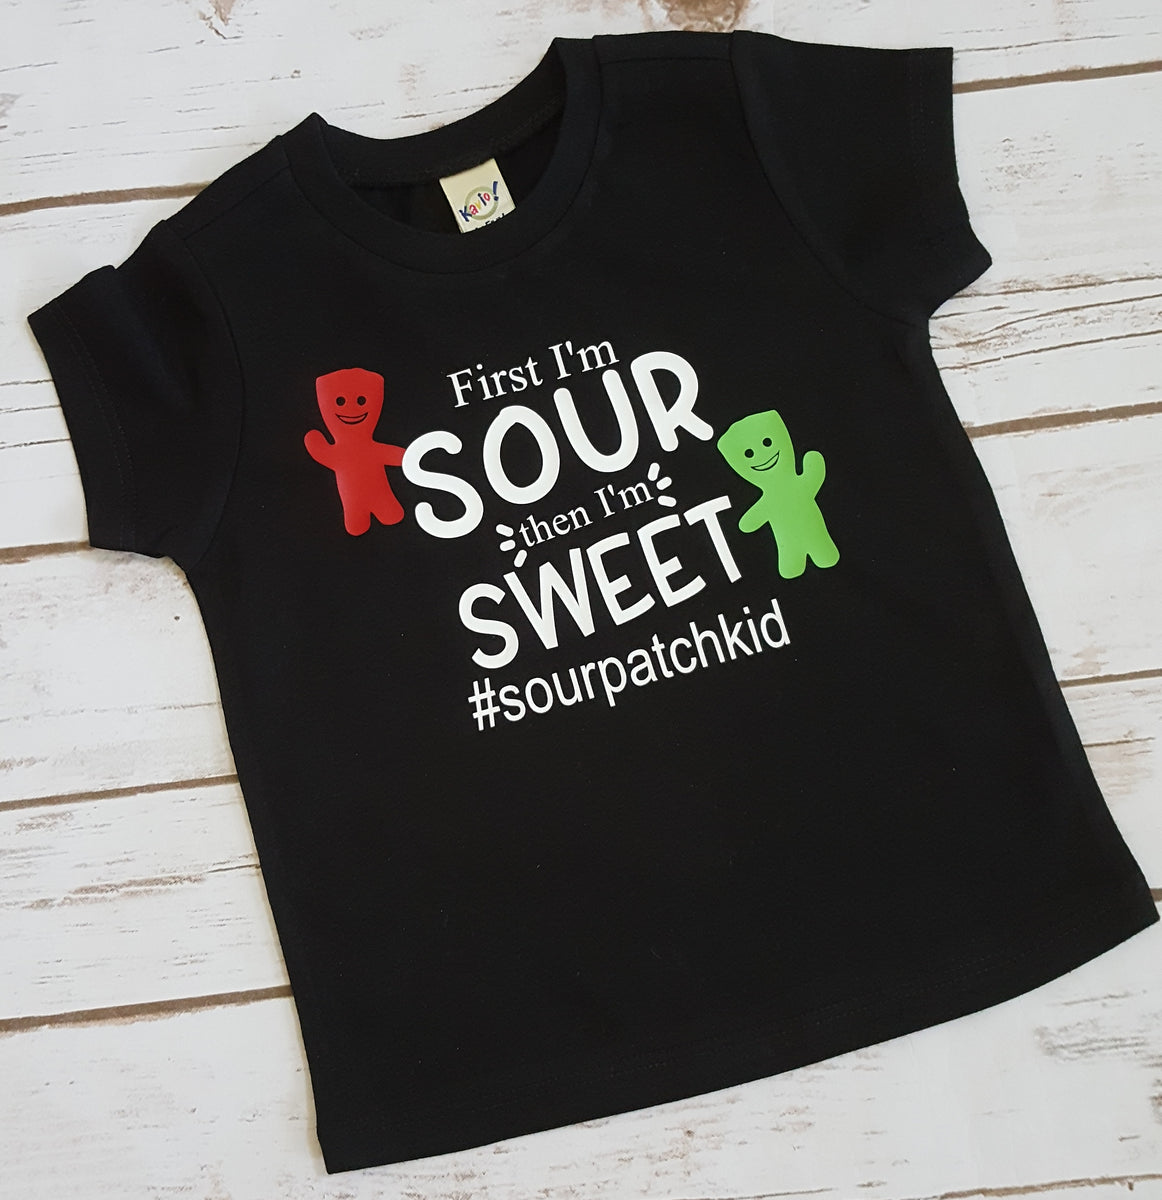 Sourt Patch Kid Tee – The Little Reasons